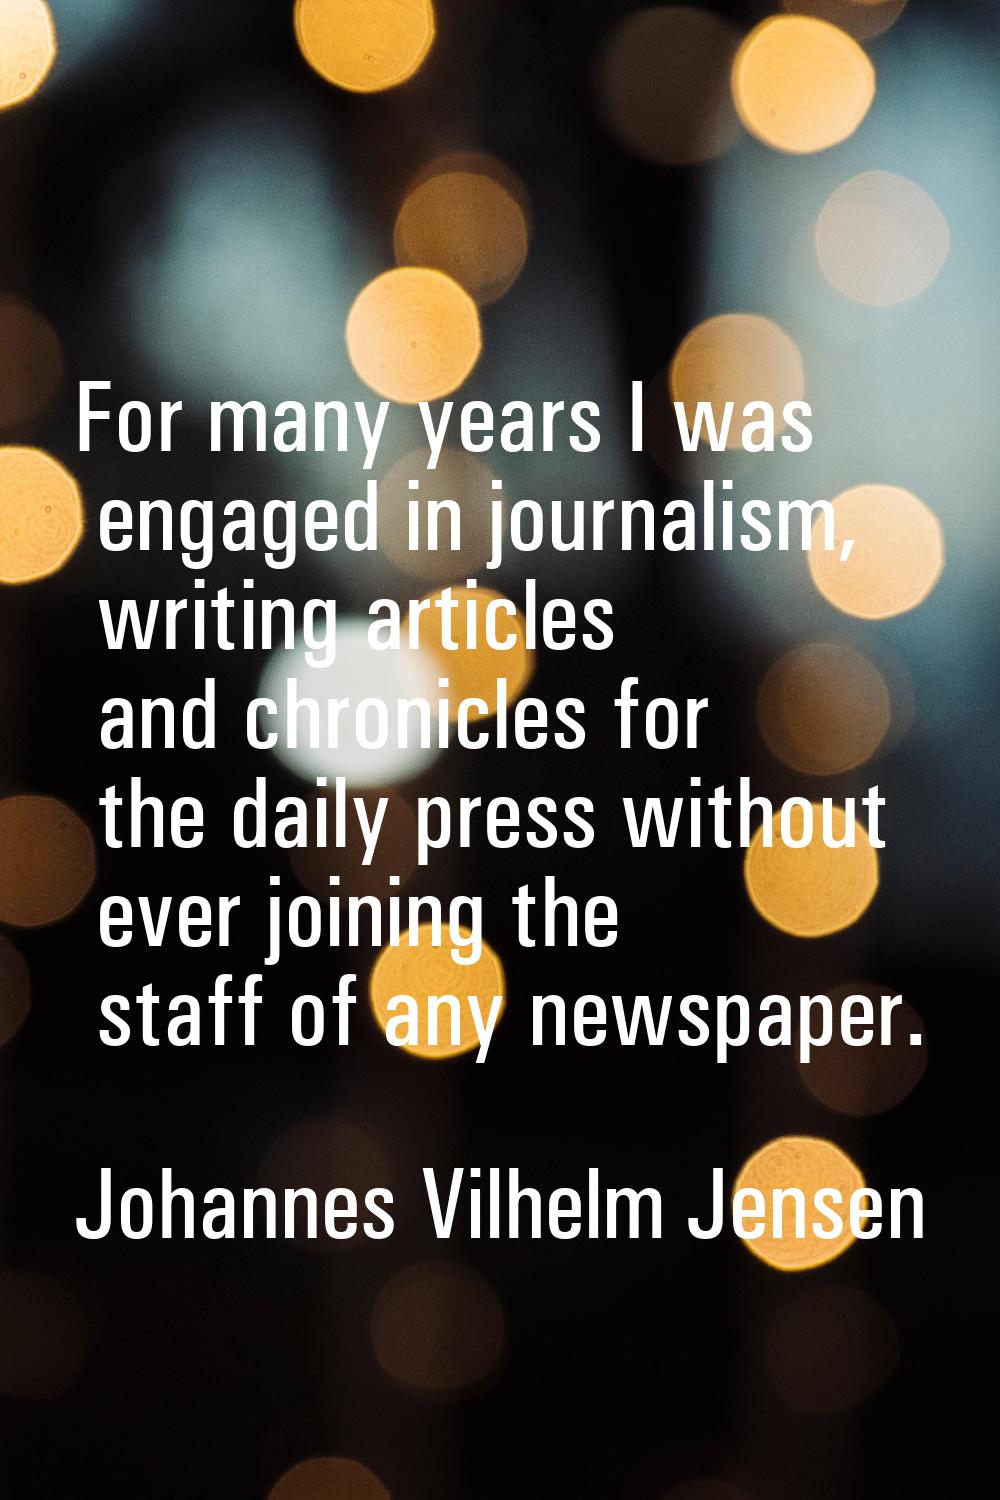 For many years I was engaged in journalism, writing articles and chronicles for the daily press wit